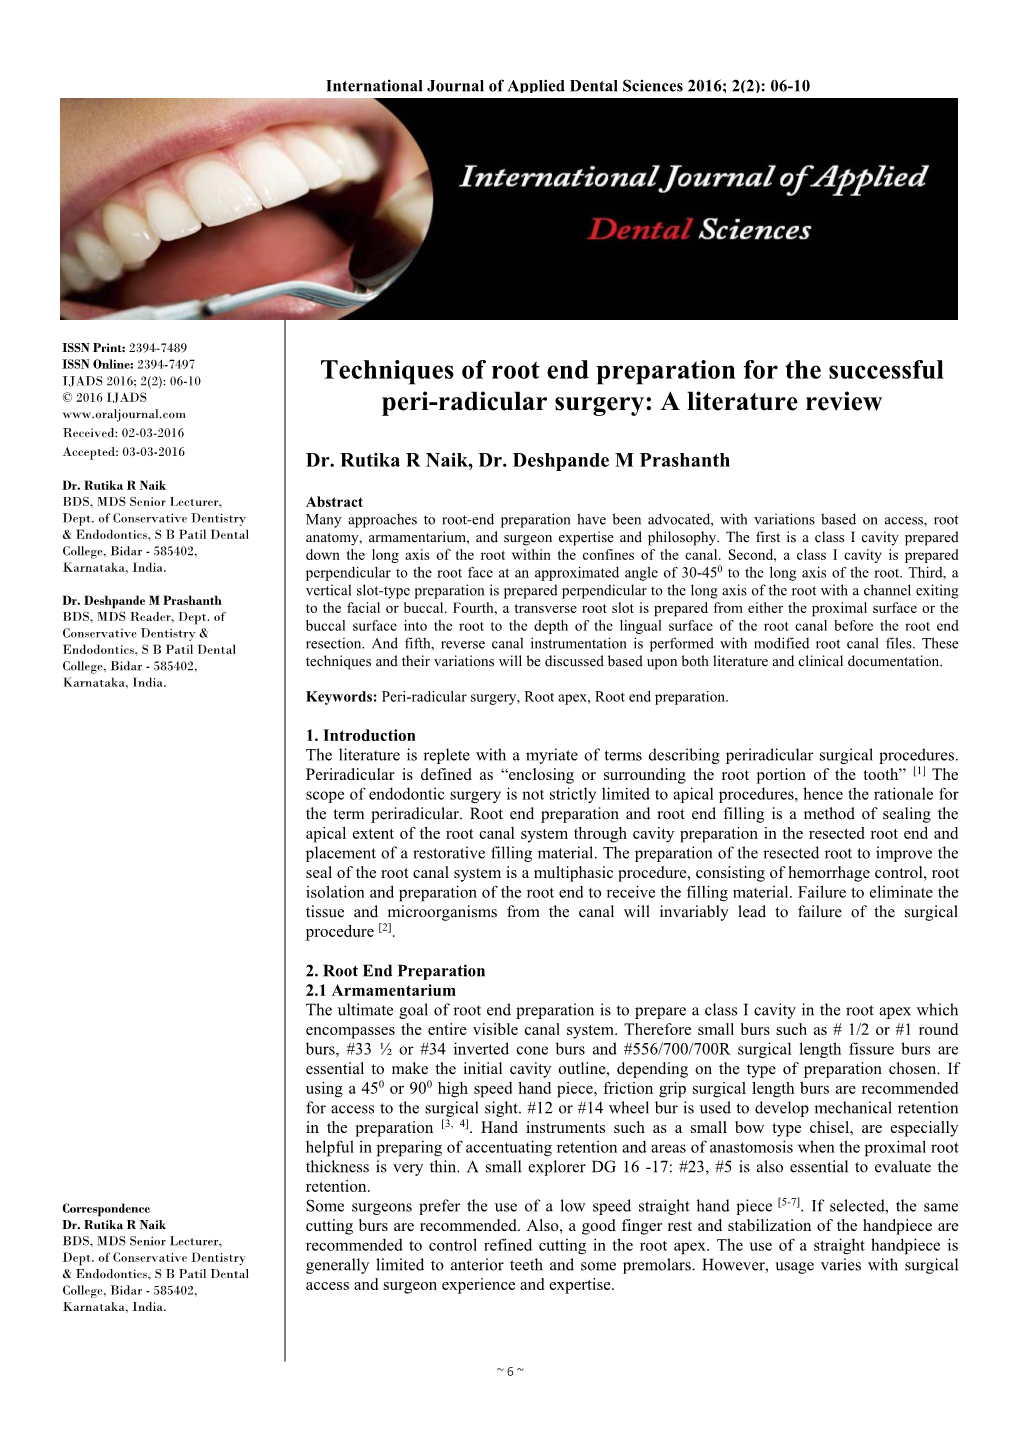 Techniques of Root End Preparation for the Successful Peri-Radicular Surgery